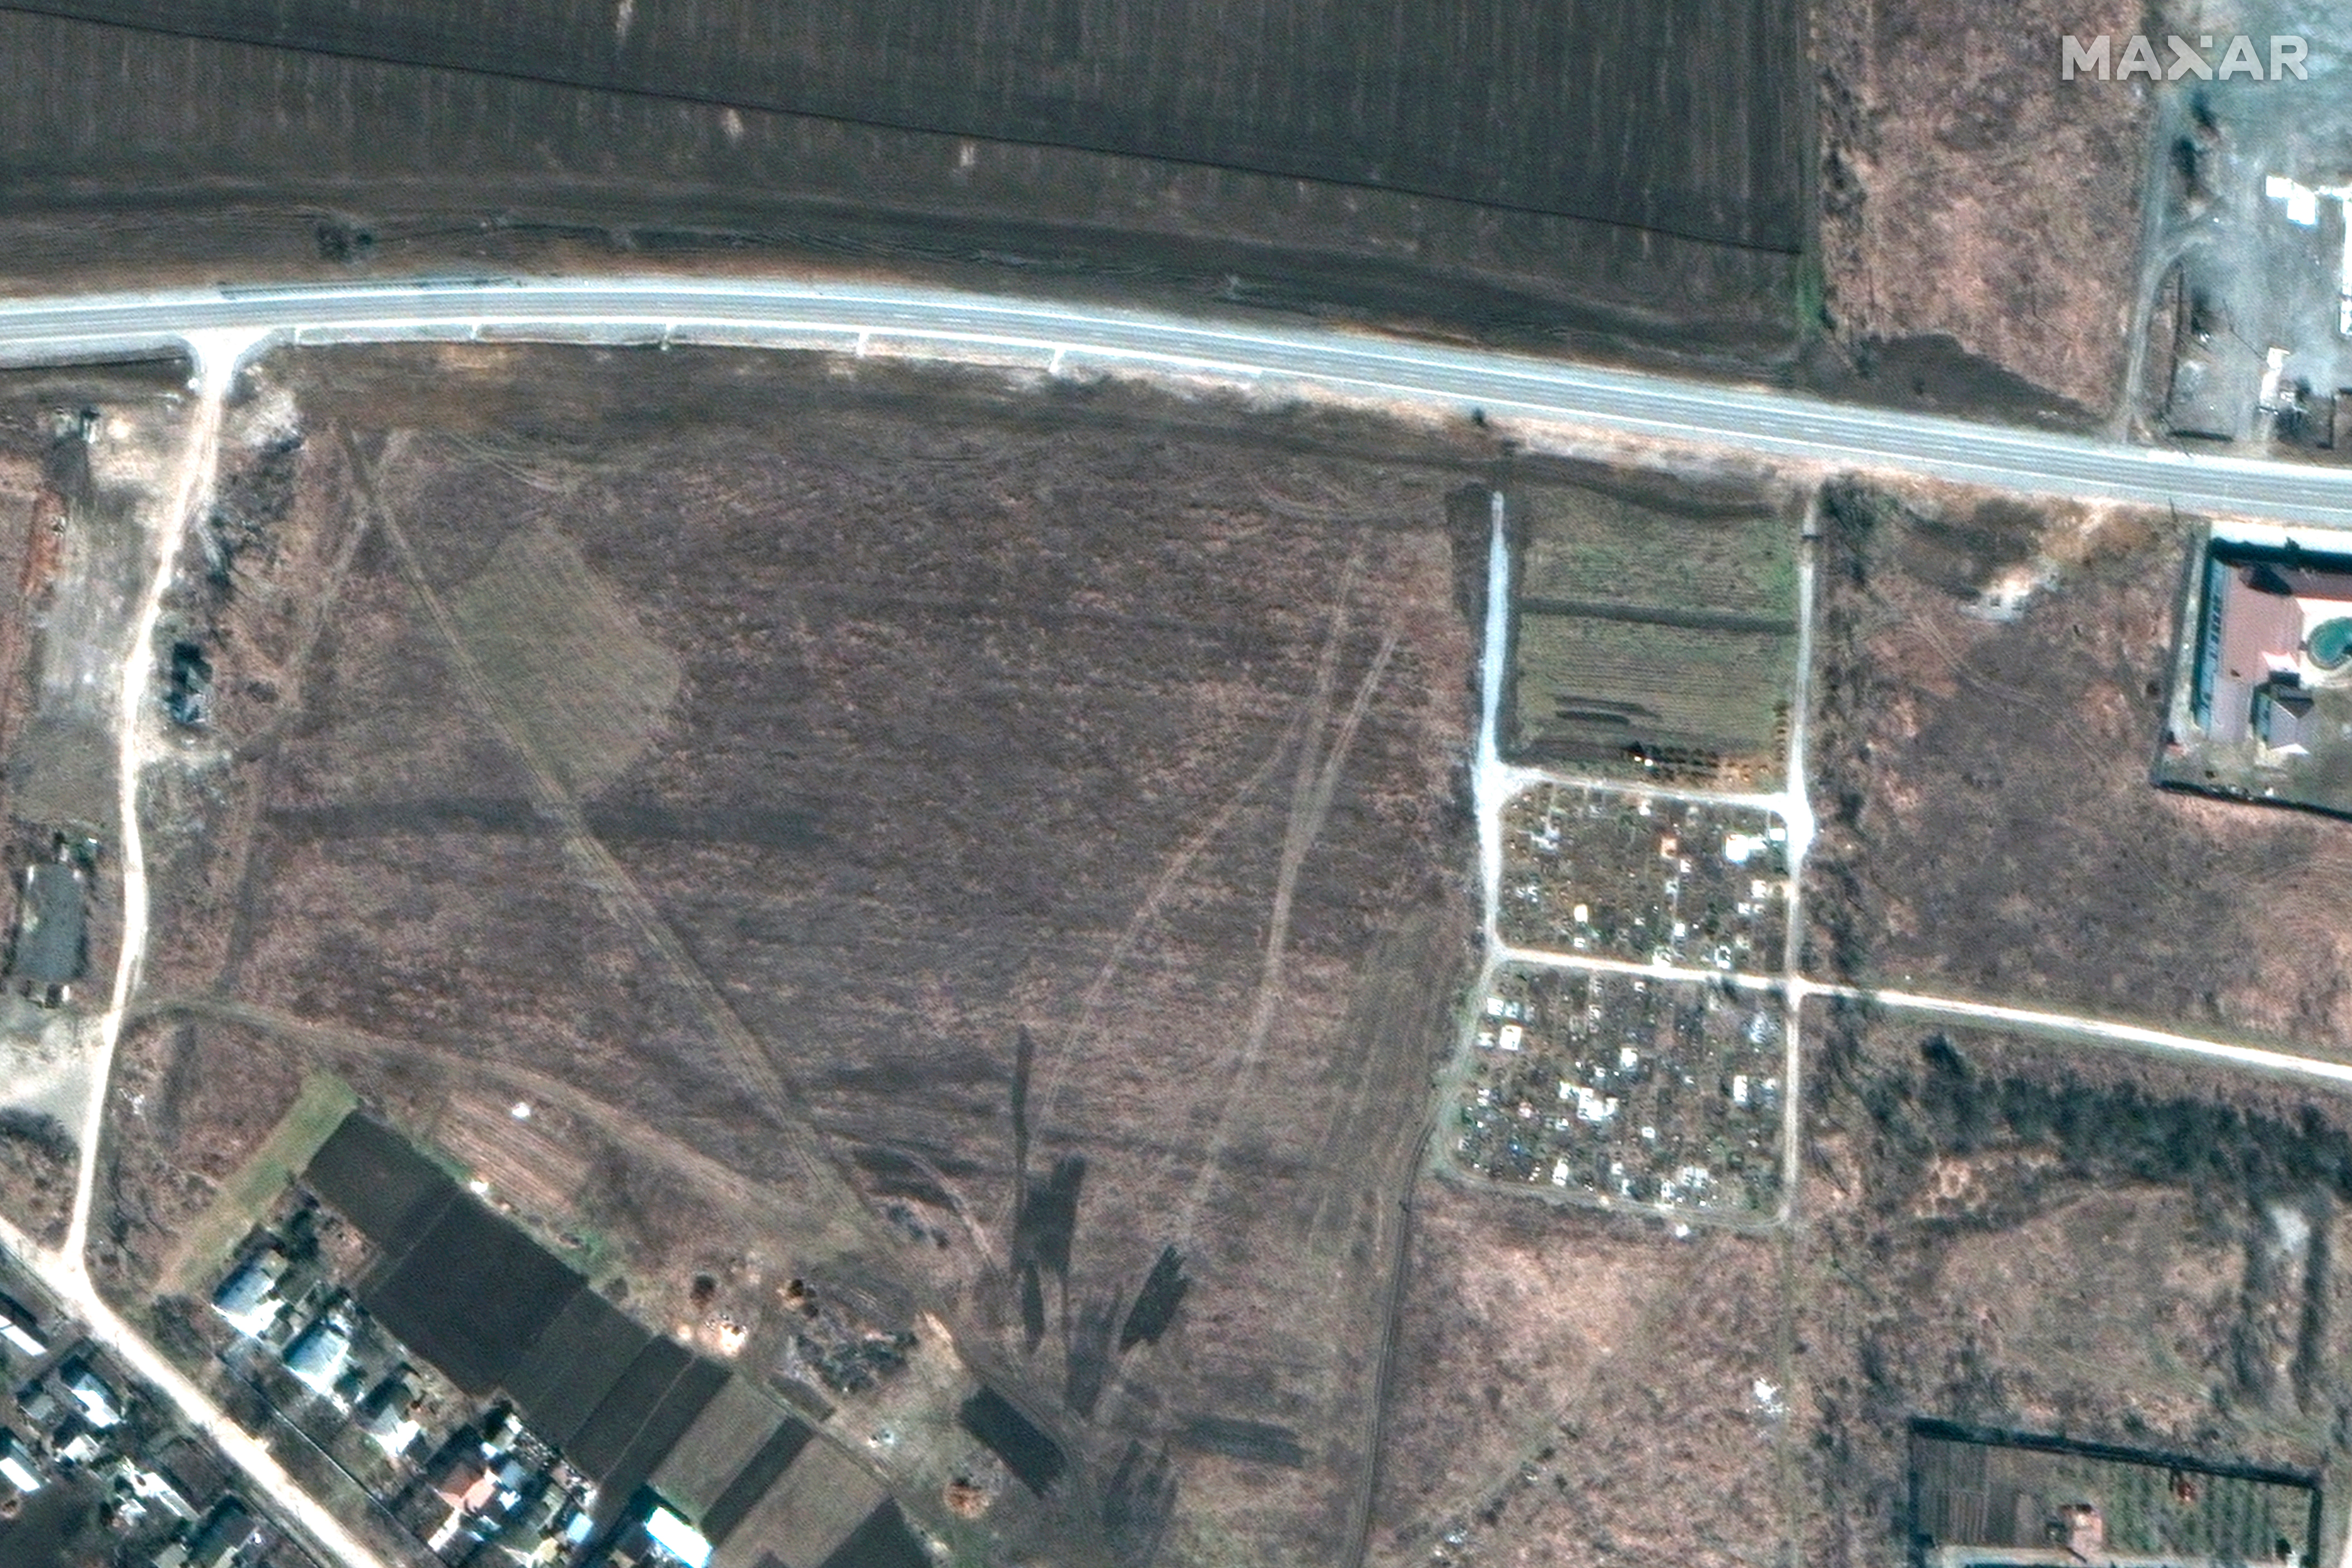 Satellite images provided by Maxar Technologies show an overview of a cemetery in Manhush, west of Mariupol